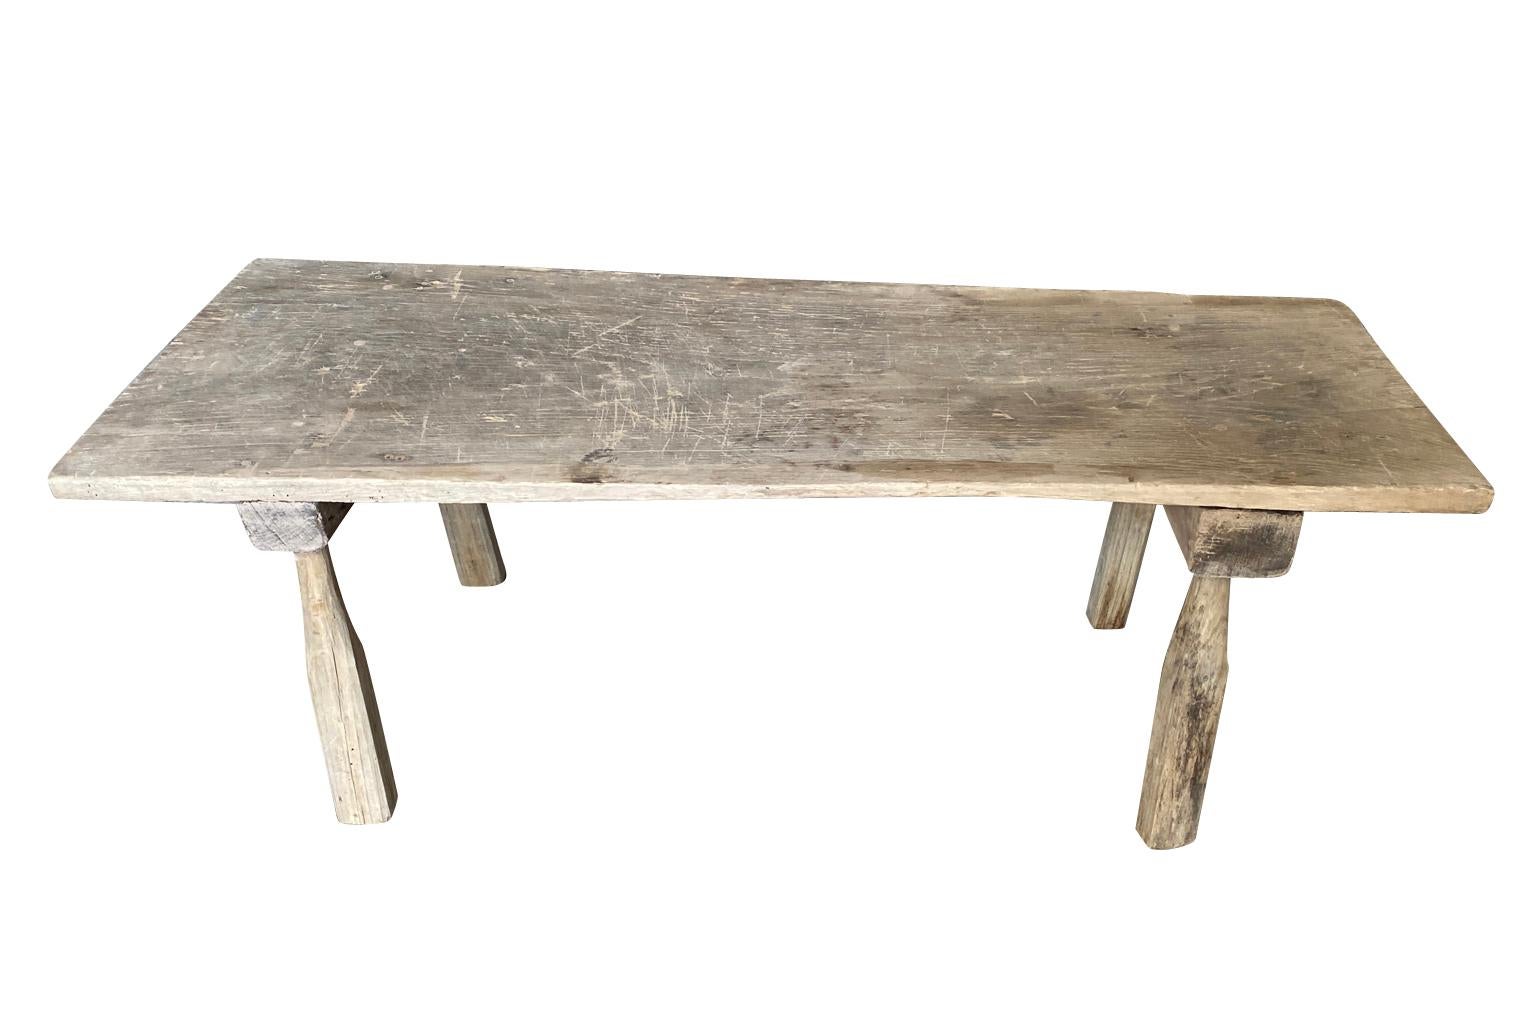 An mid-19th century Table Basse - Coffee Table from the Catalan region of Spain.  Soundly constructed from oak with a solid board top.  Perfect for any casual environment.